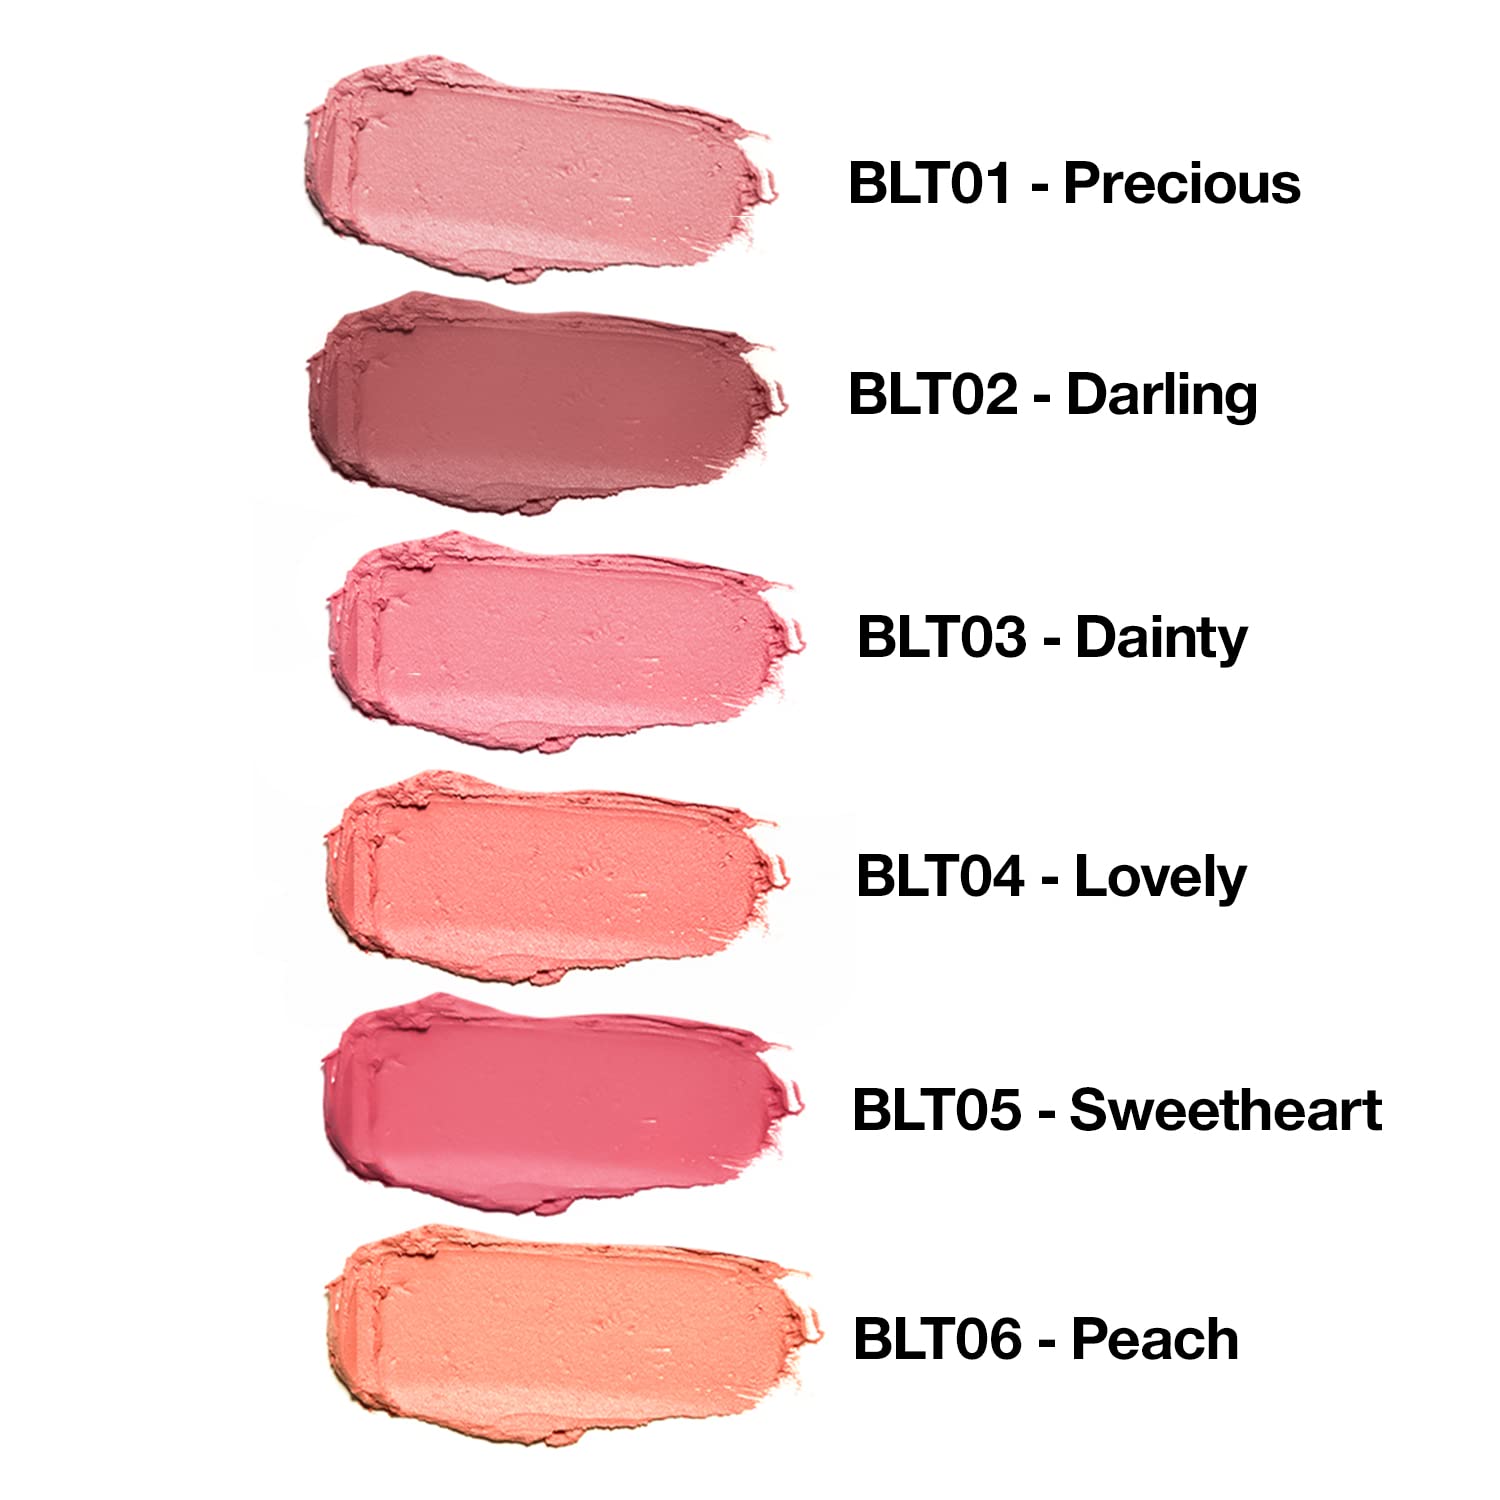 Palladio I'm Blushing 2-in-1 Cheek and Lip Tint, Buildable L